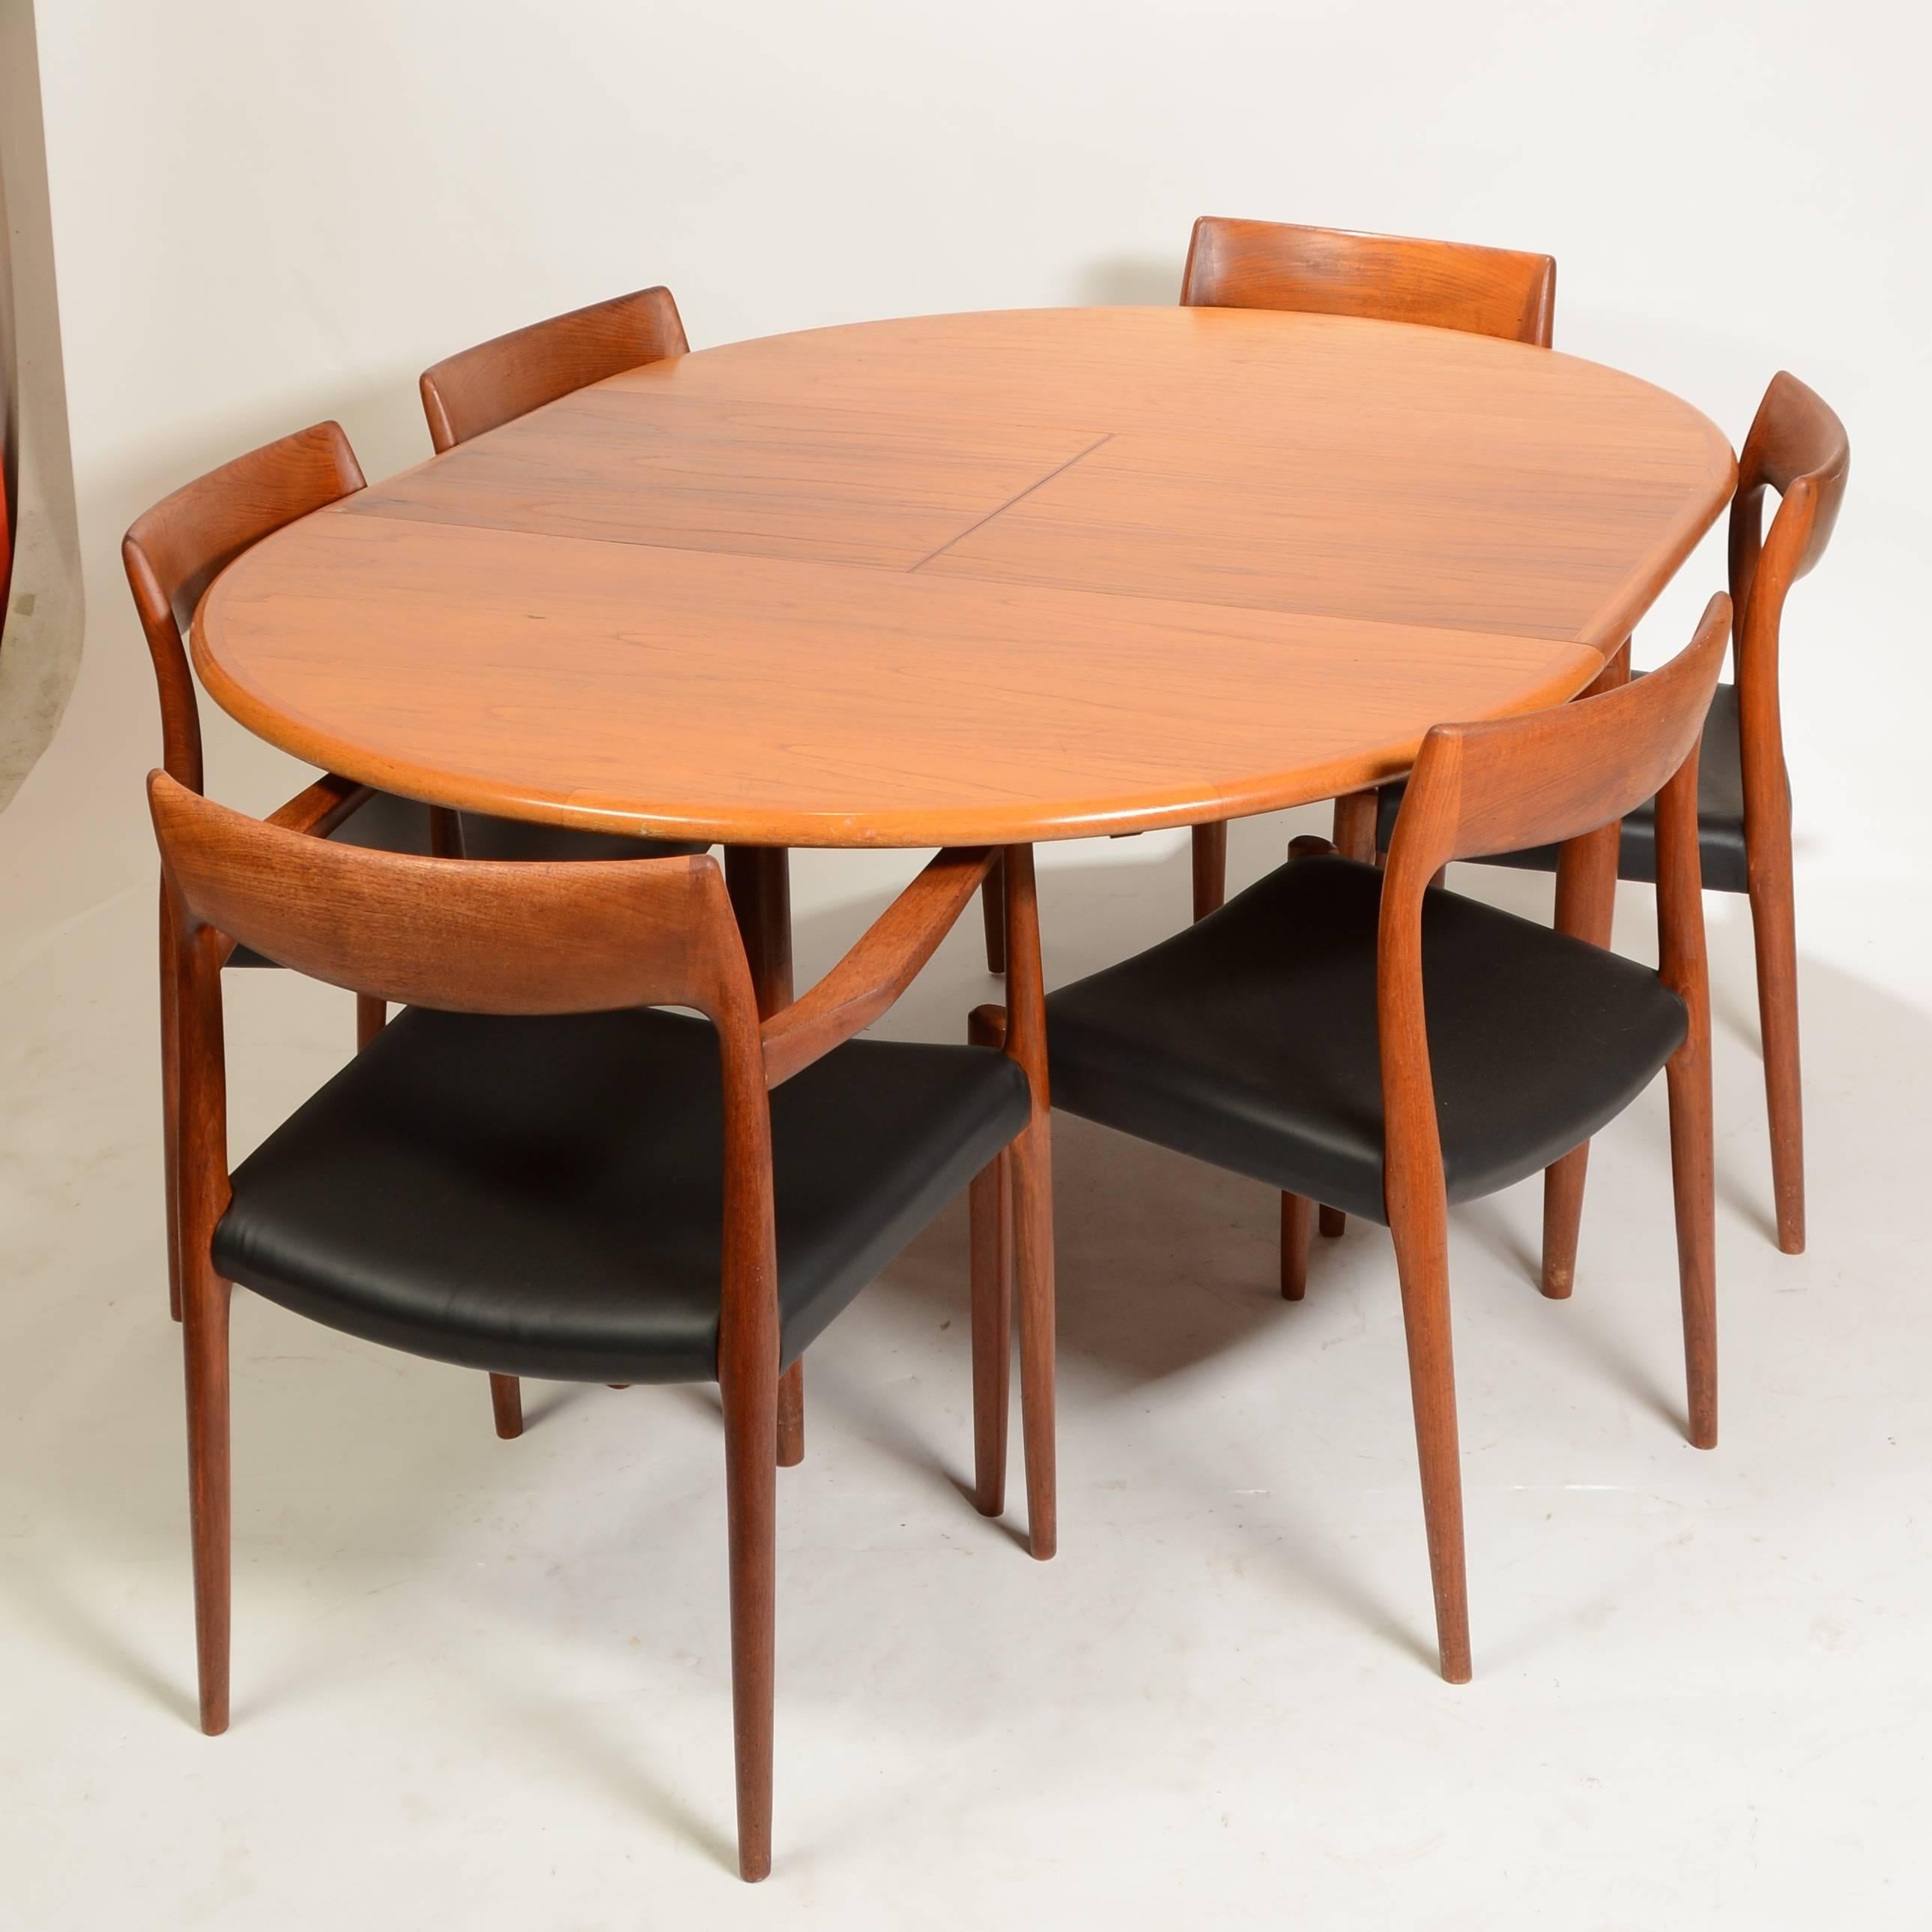 Mid-20th Century Niels Otto Moller for J. L. Moller #15 Teak Table with Butterfly Leaf